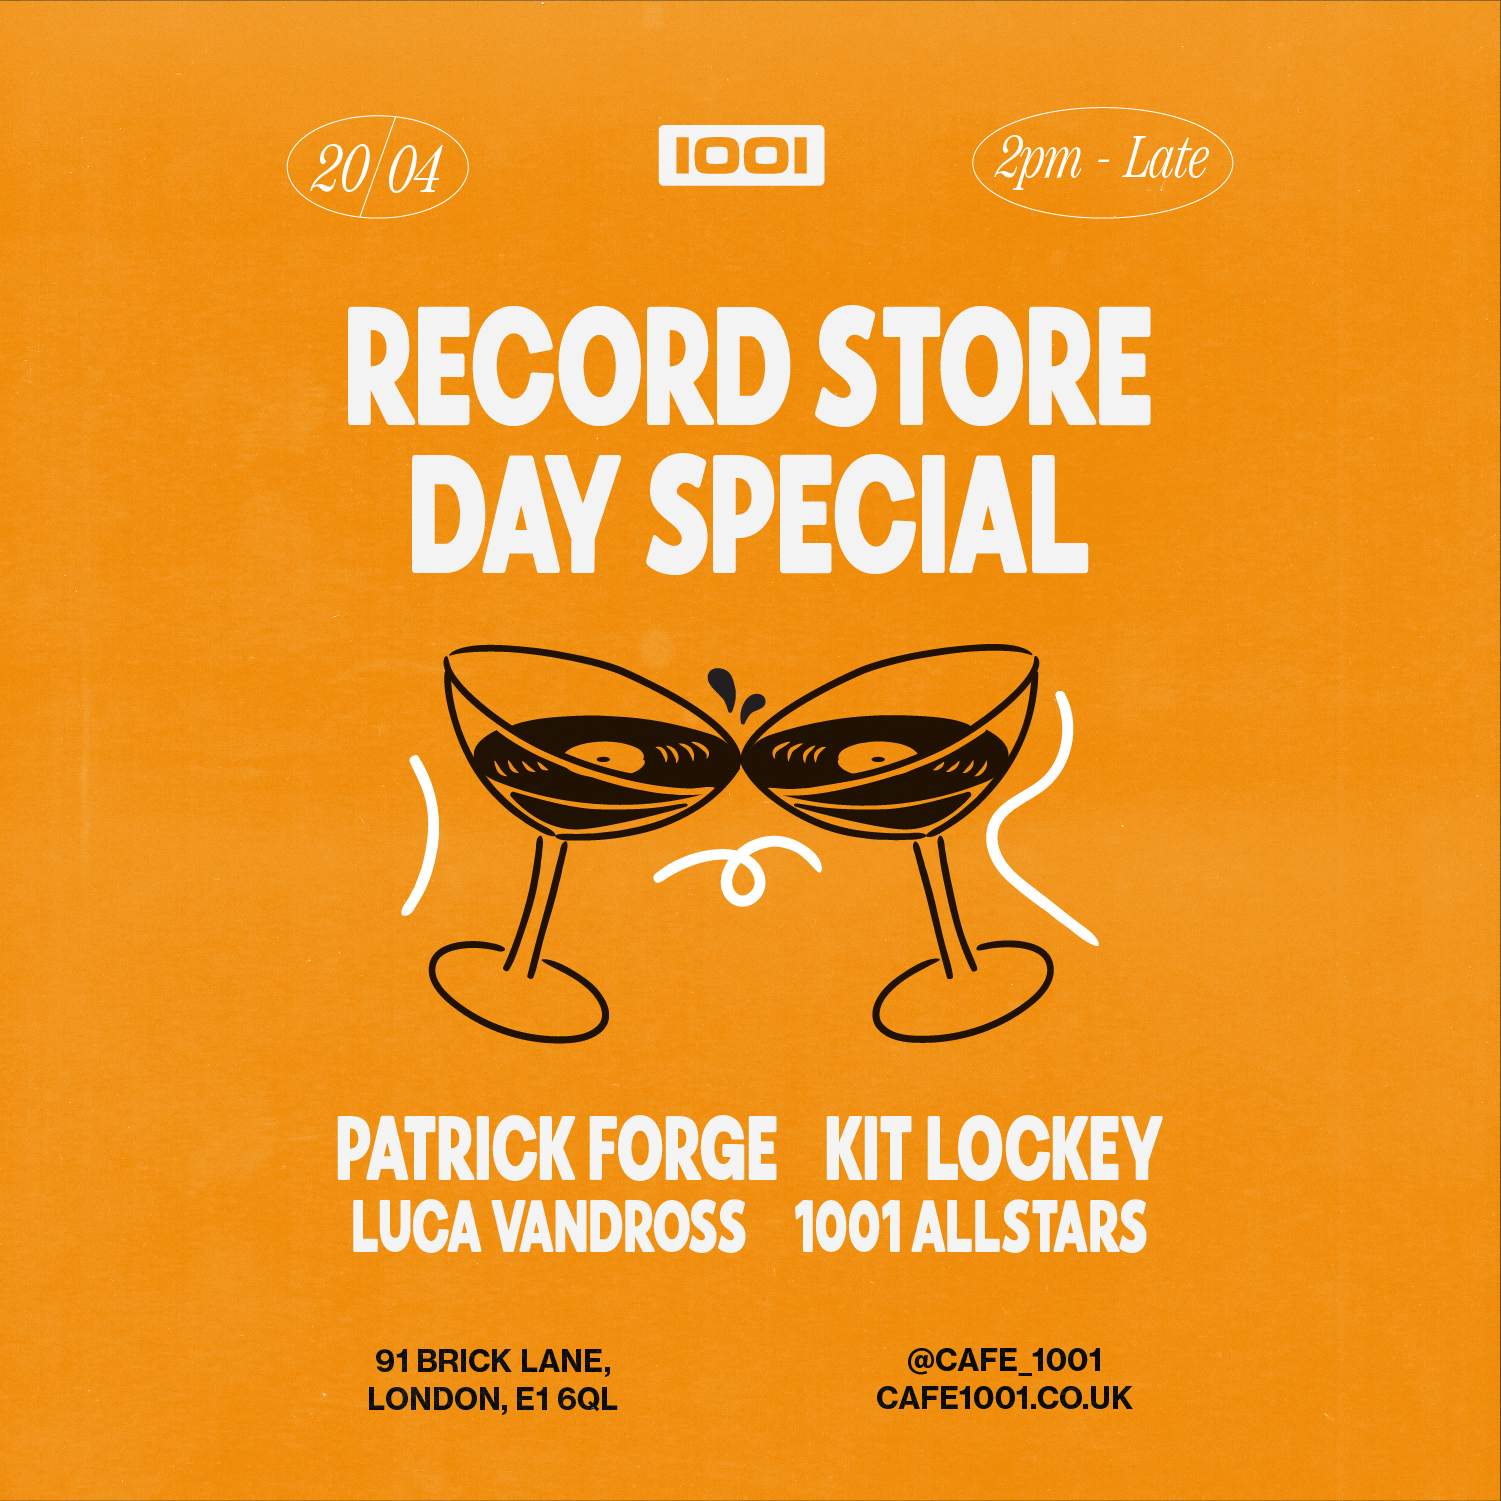 Record Store Day Special with Patrick Forge & Guests - フライヤー表